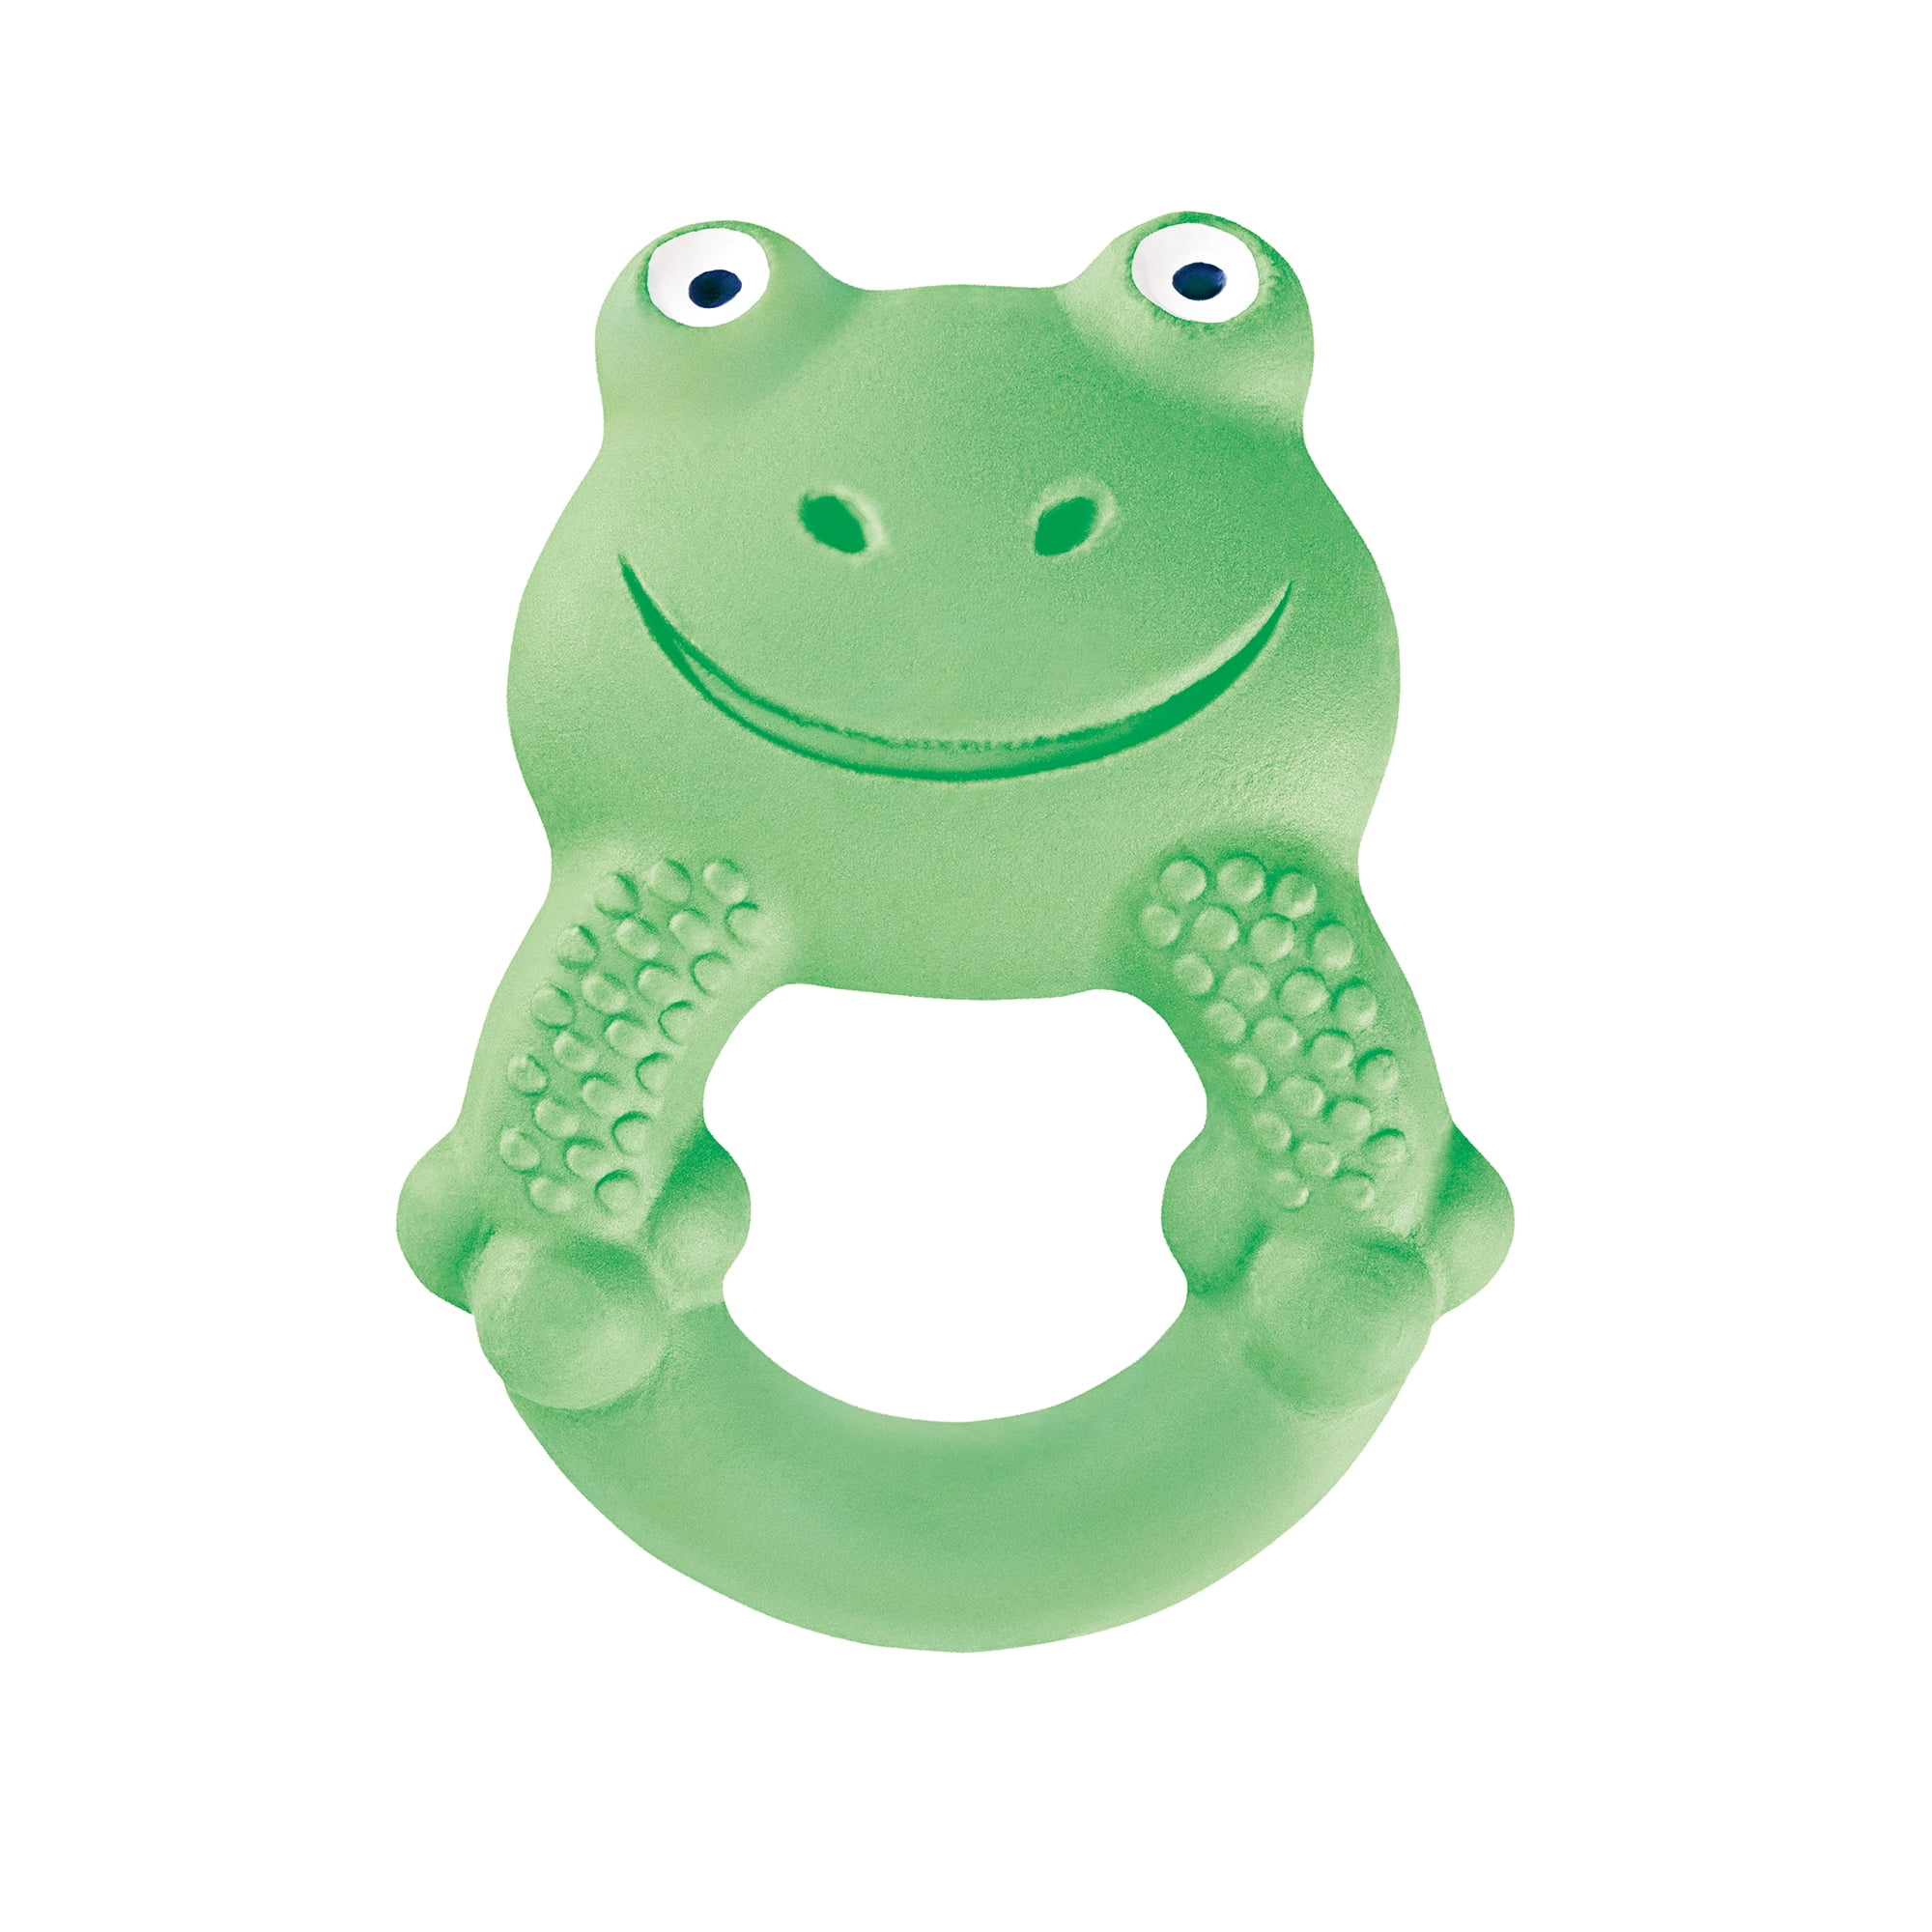 Baby Teether Frog Elephant Mitts Silicone Safe Soft Chew Molar Toy Teething Ring 